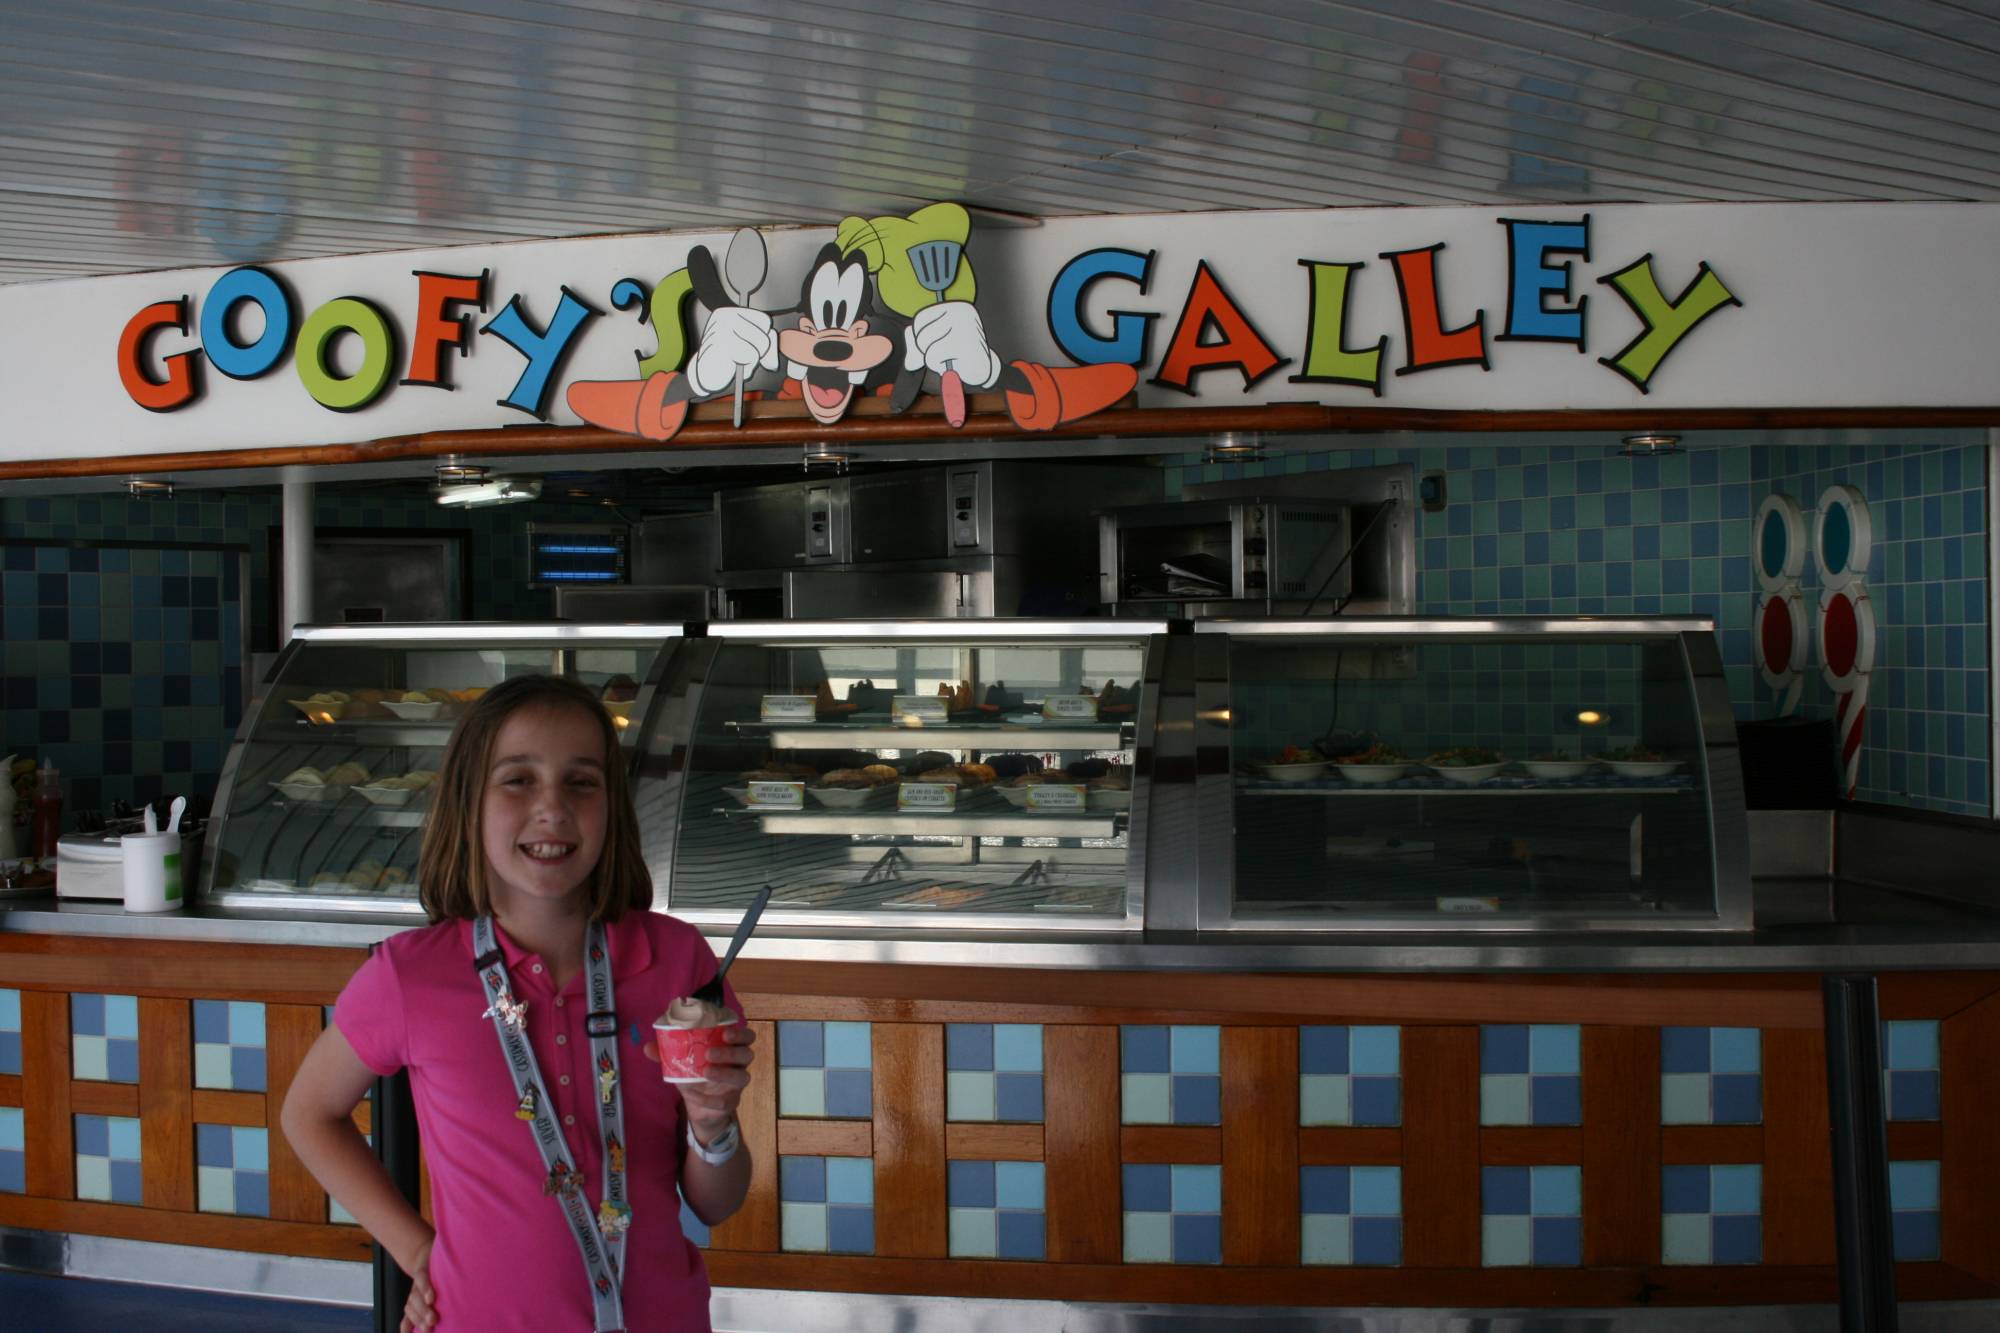 Goofy's Galley on the Magic